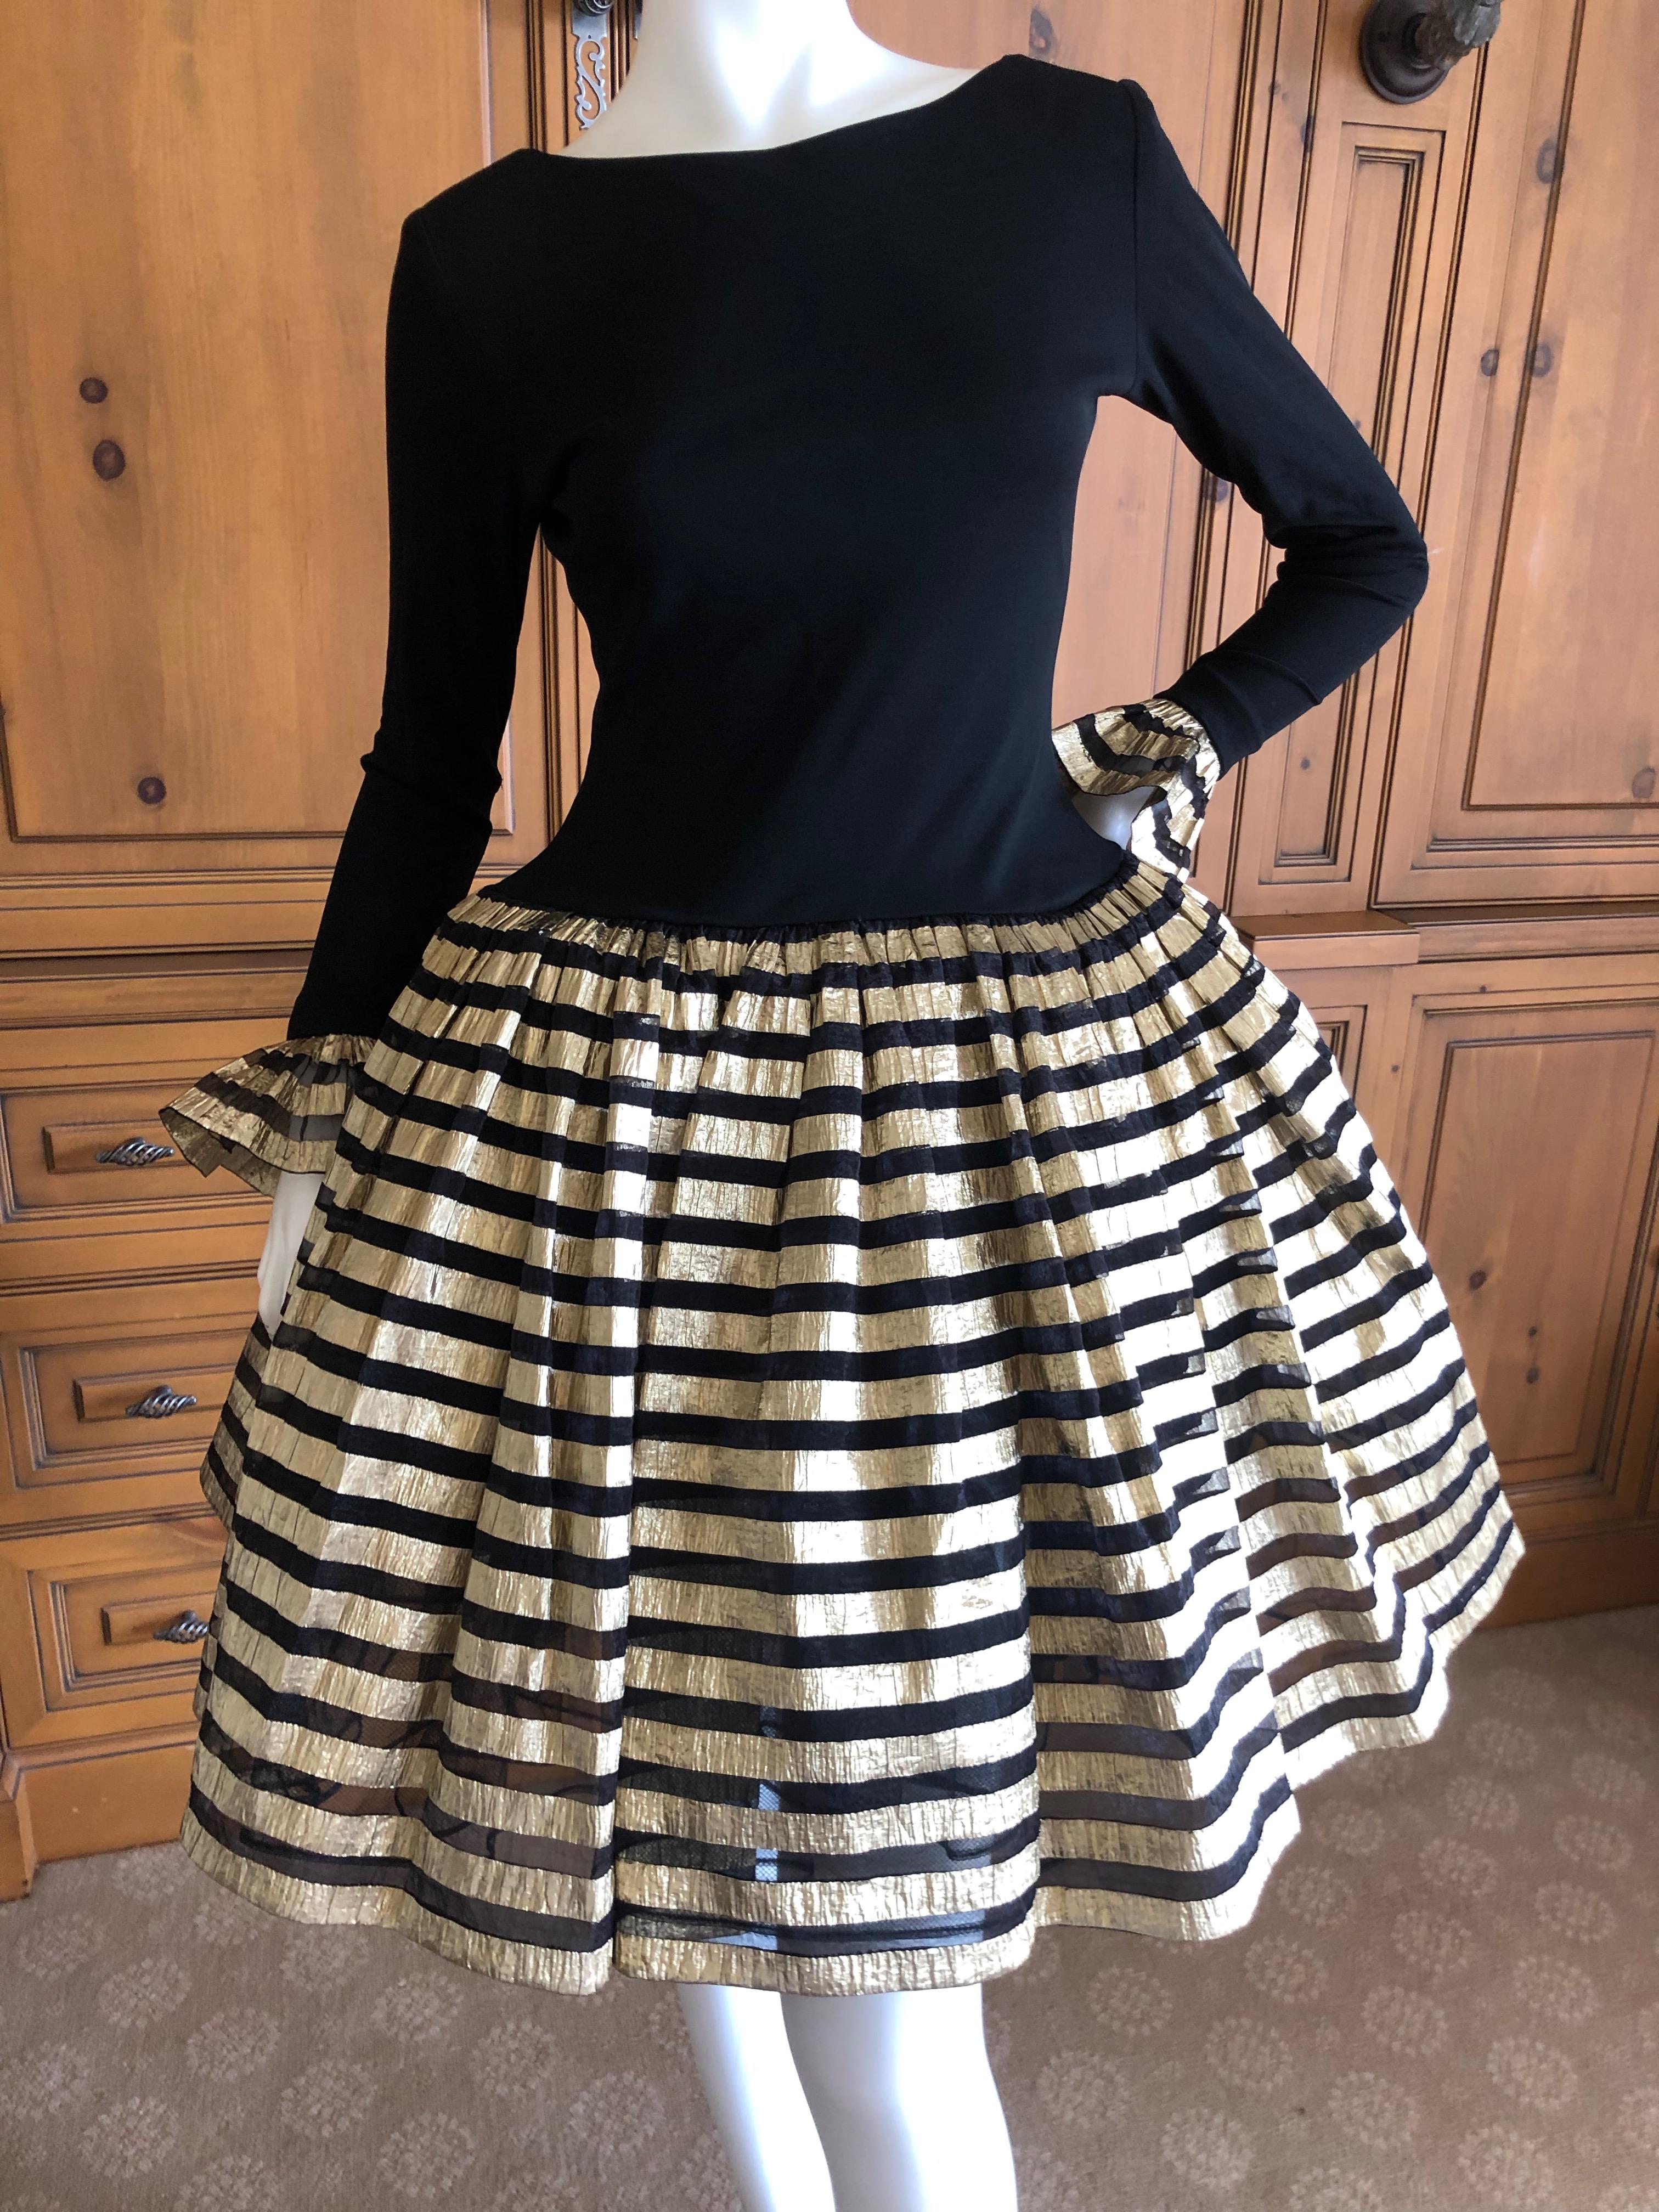 Bob Mackie Gold and Black Vintage Cocktail Dress w Ballerina Skirt & Petticoats In Excellent Condition For Sale In Cloverdale, CA